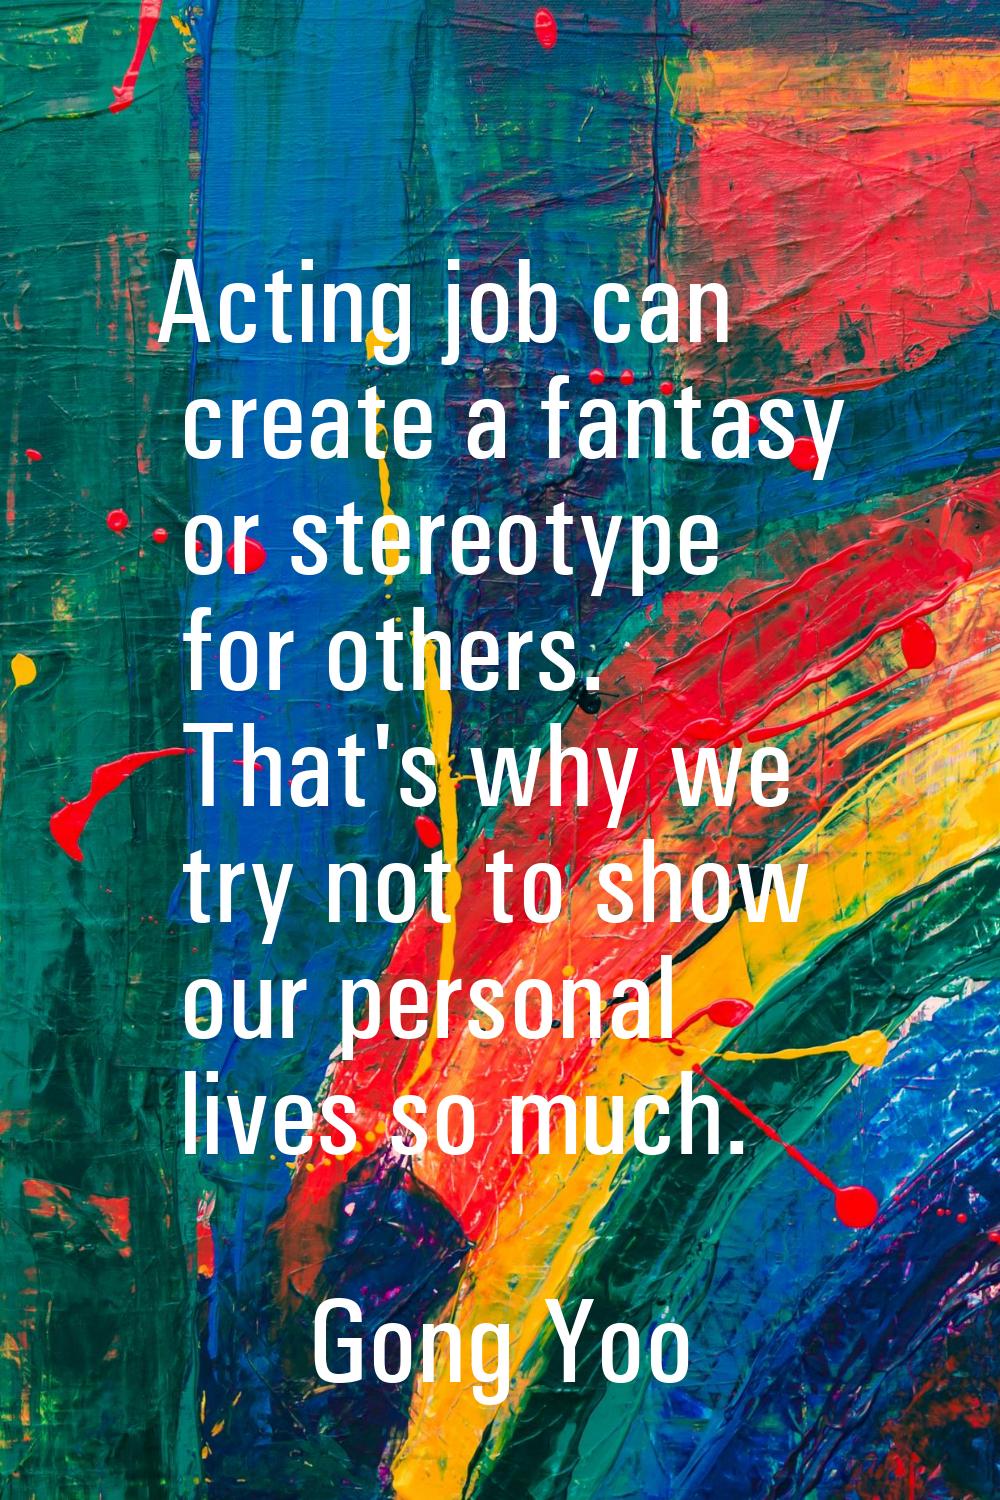 Acting job can create a fantasy or stereotype for others. That's why we try not to show our persona